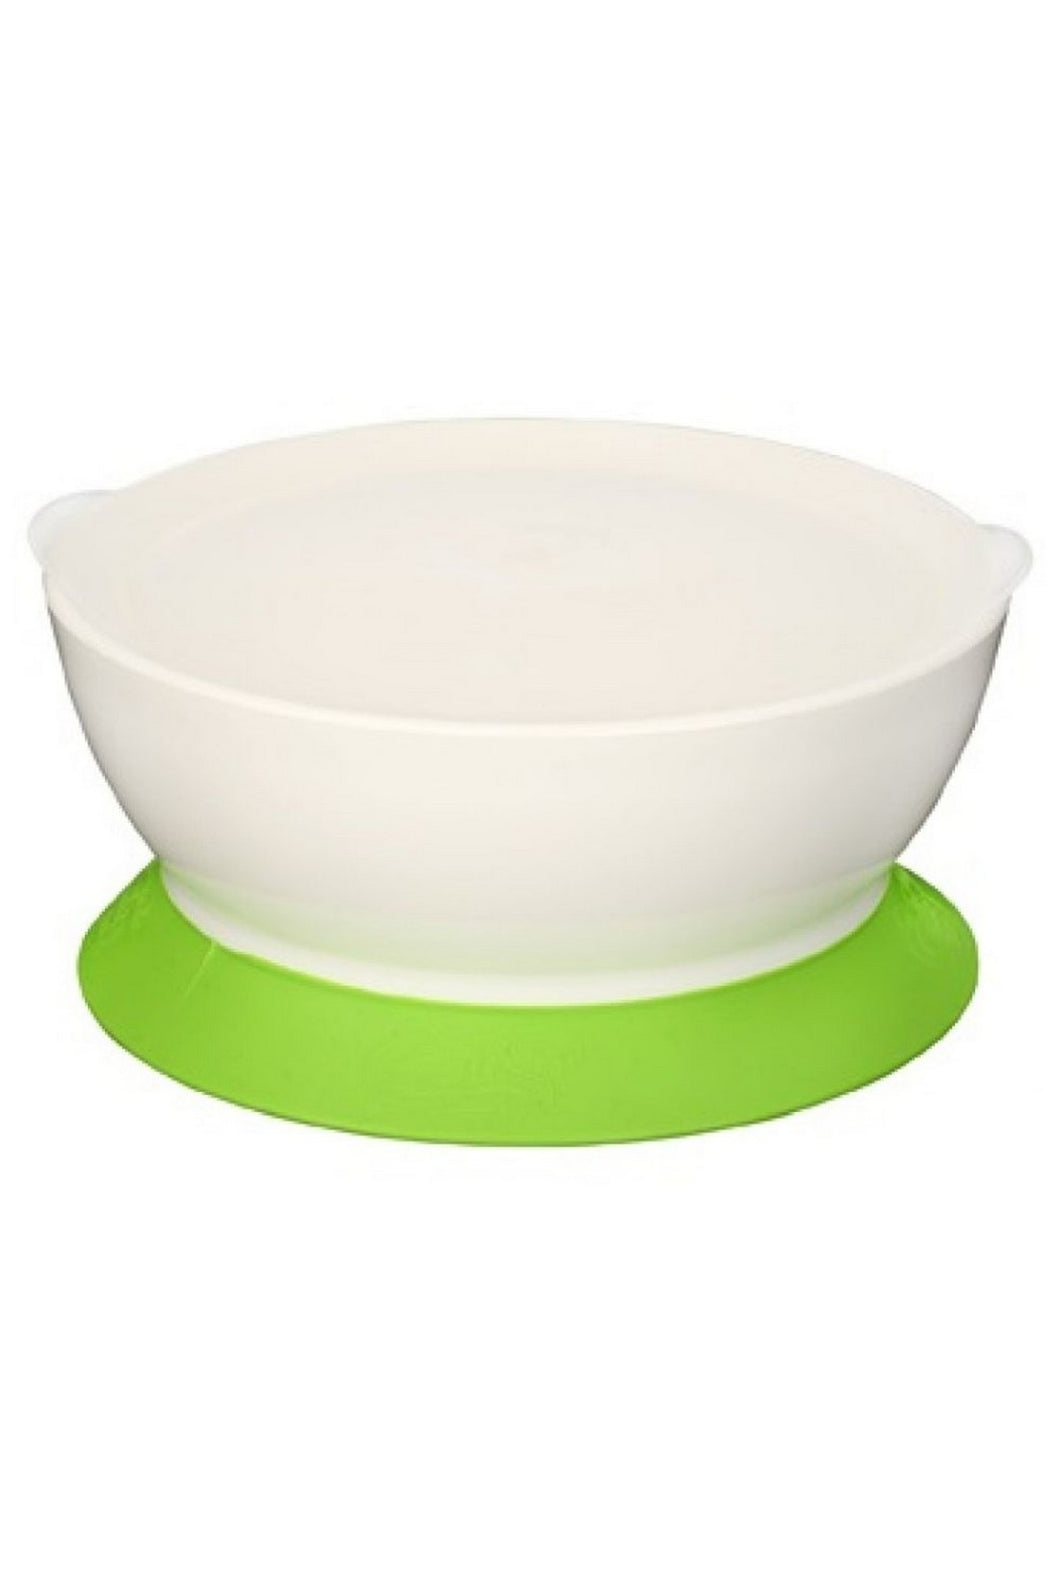 Calibowl 12Oz Suction Bowl With Lid Green